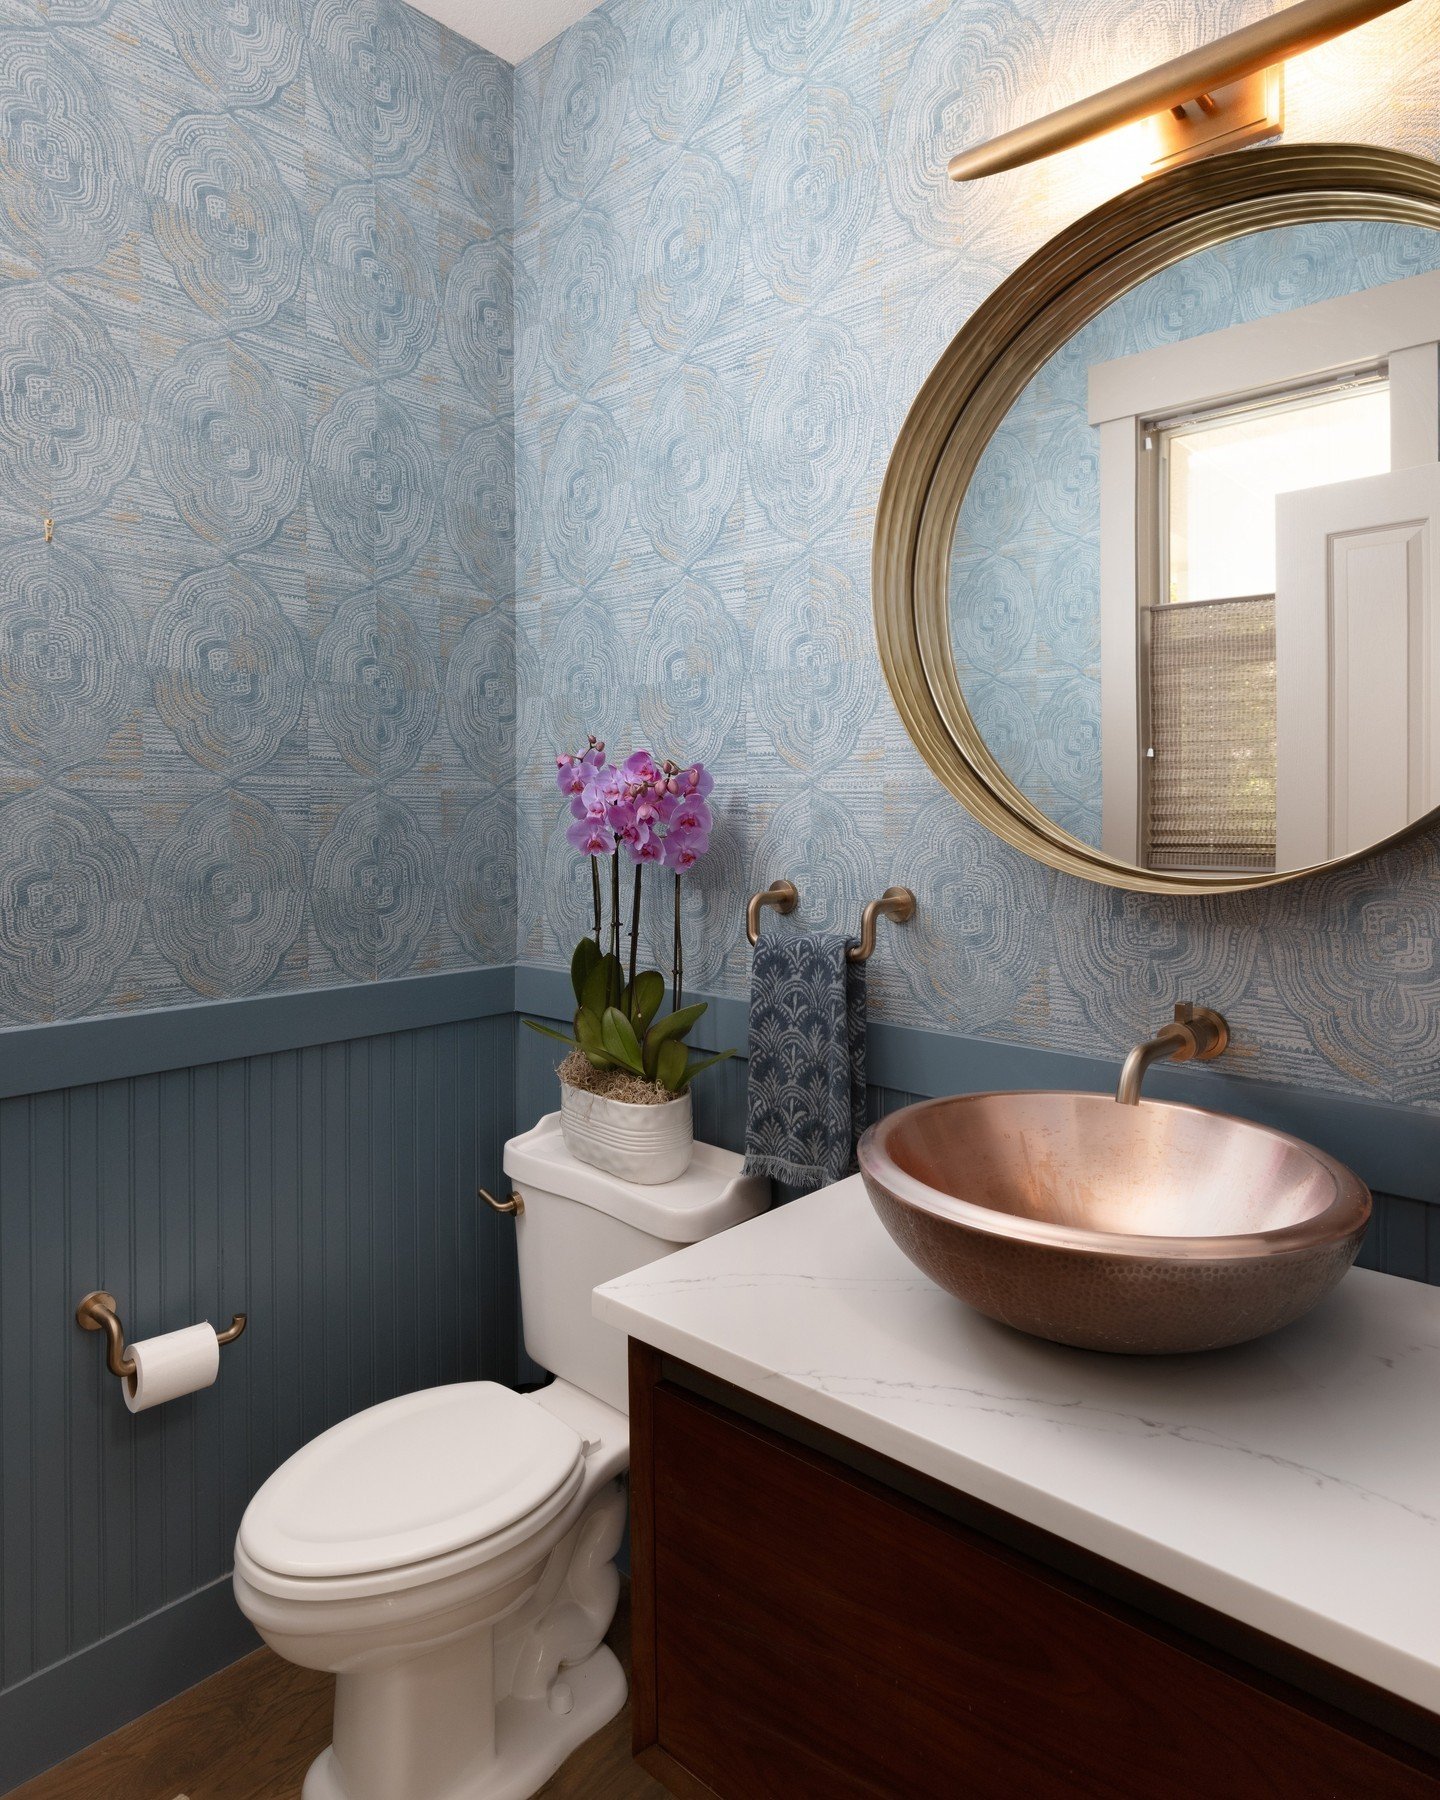 Pretty blue hues and mixed metals define this powder room. Name a better duo 💙

--
project: Wordly Mid-Century Retreat
interior design: Atelier Interior Design | Denver Interior Designer
photographer: @kyliefitts

#atelierdenver #atelierinteriordesi